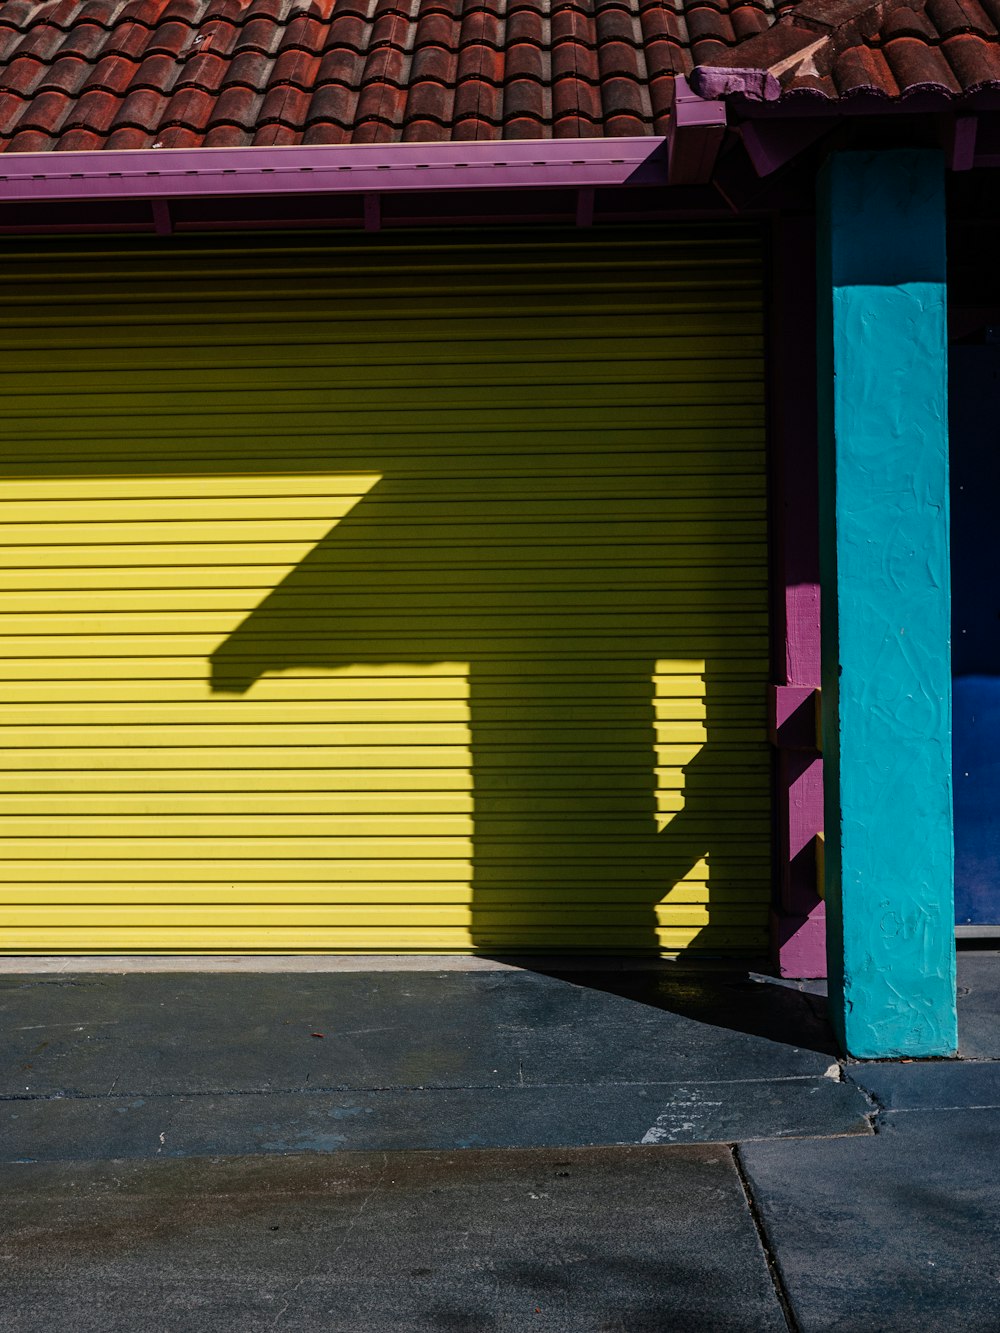 a shadow of a street sign on a yellow garage door